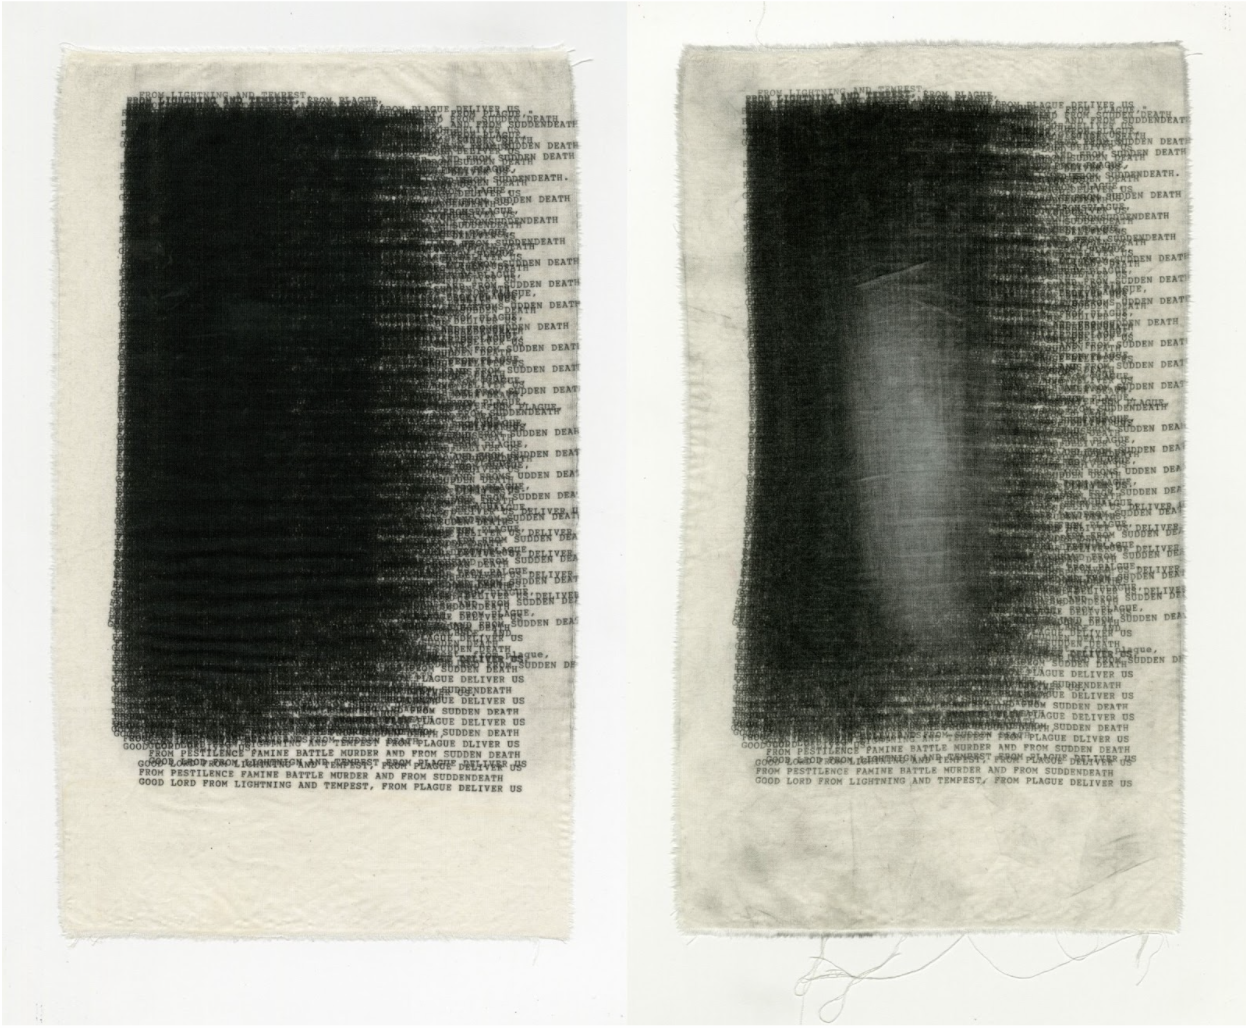 On left is a textile with a typewritten phrase from the Book of Common Prayer: "FROM PESTILENCE FAMINE BATTLE MURDER AND FROM SUDDEN DEATH GOOD LORD FROM LIGHTNING AND TEMPEST, FROM PLAGUE DELIVER US." The phrase is overtyped 549 times on the textile surface and eventually obscures itself. On the right is the same textile, after washing.